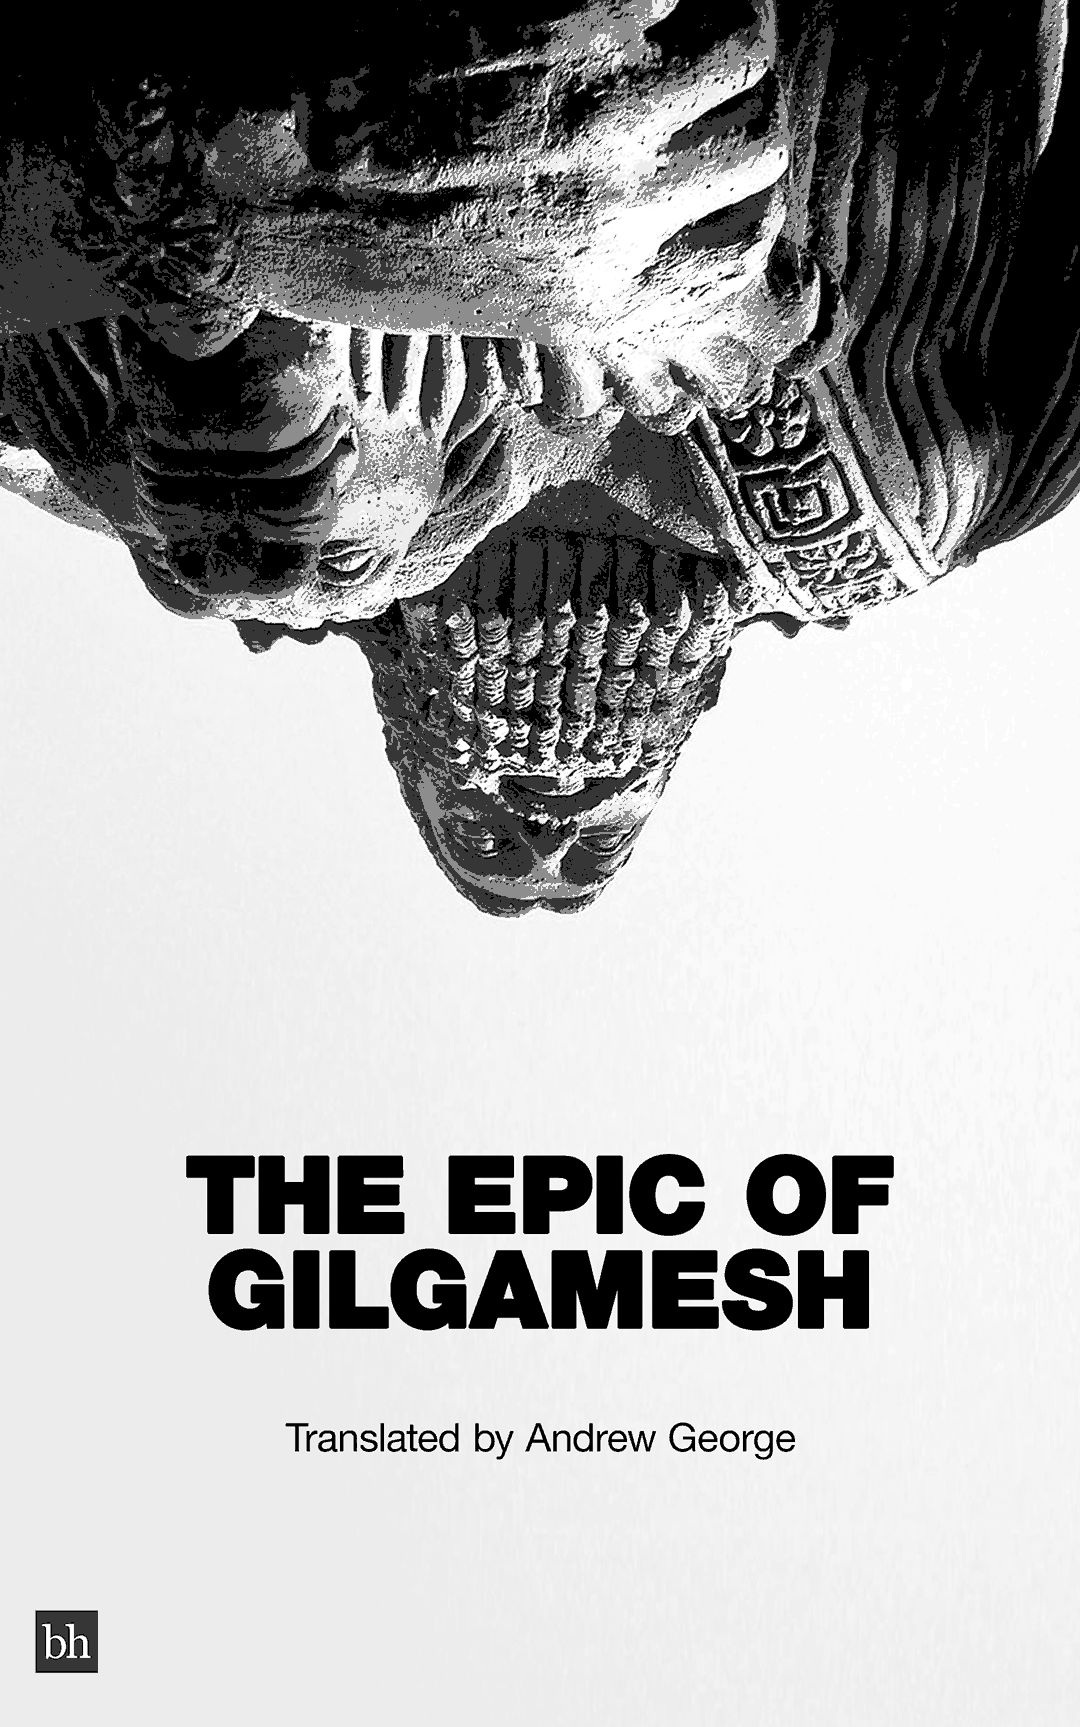 The Epic of Gilgamesh by Translated by Andrew George